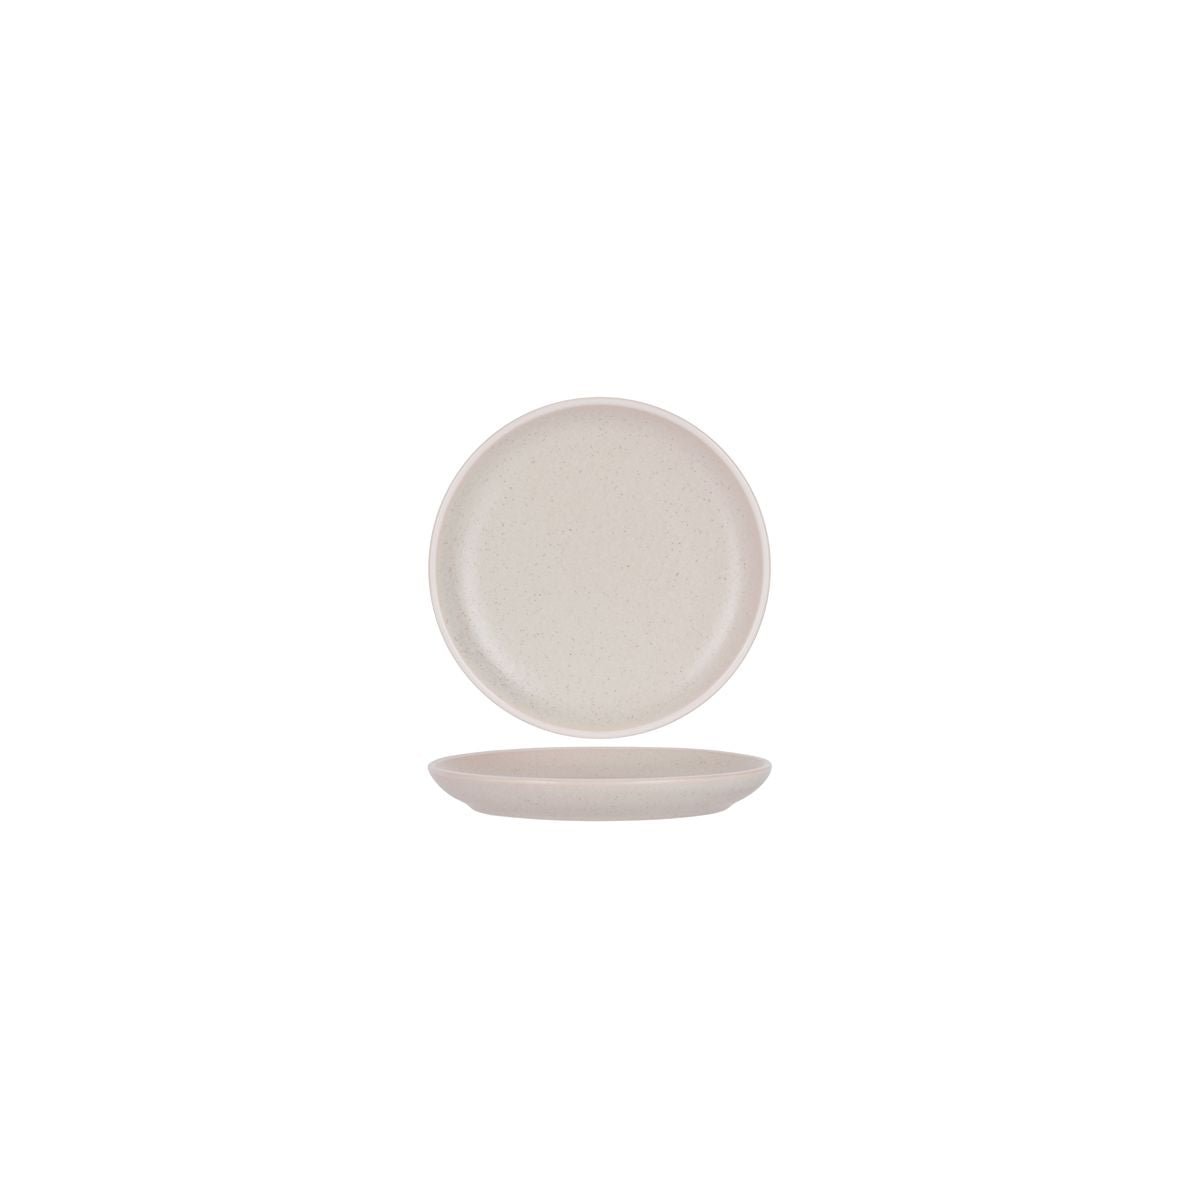 Tablekraft Urban Round Coupe Plate 160Mm Sand: Pack of 6